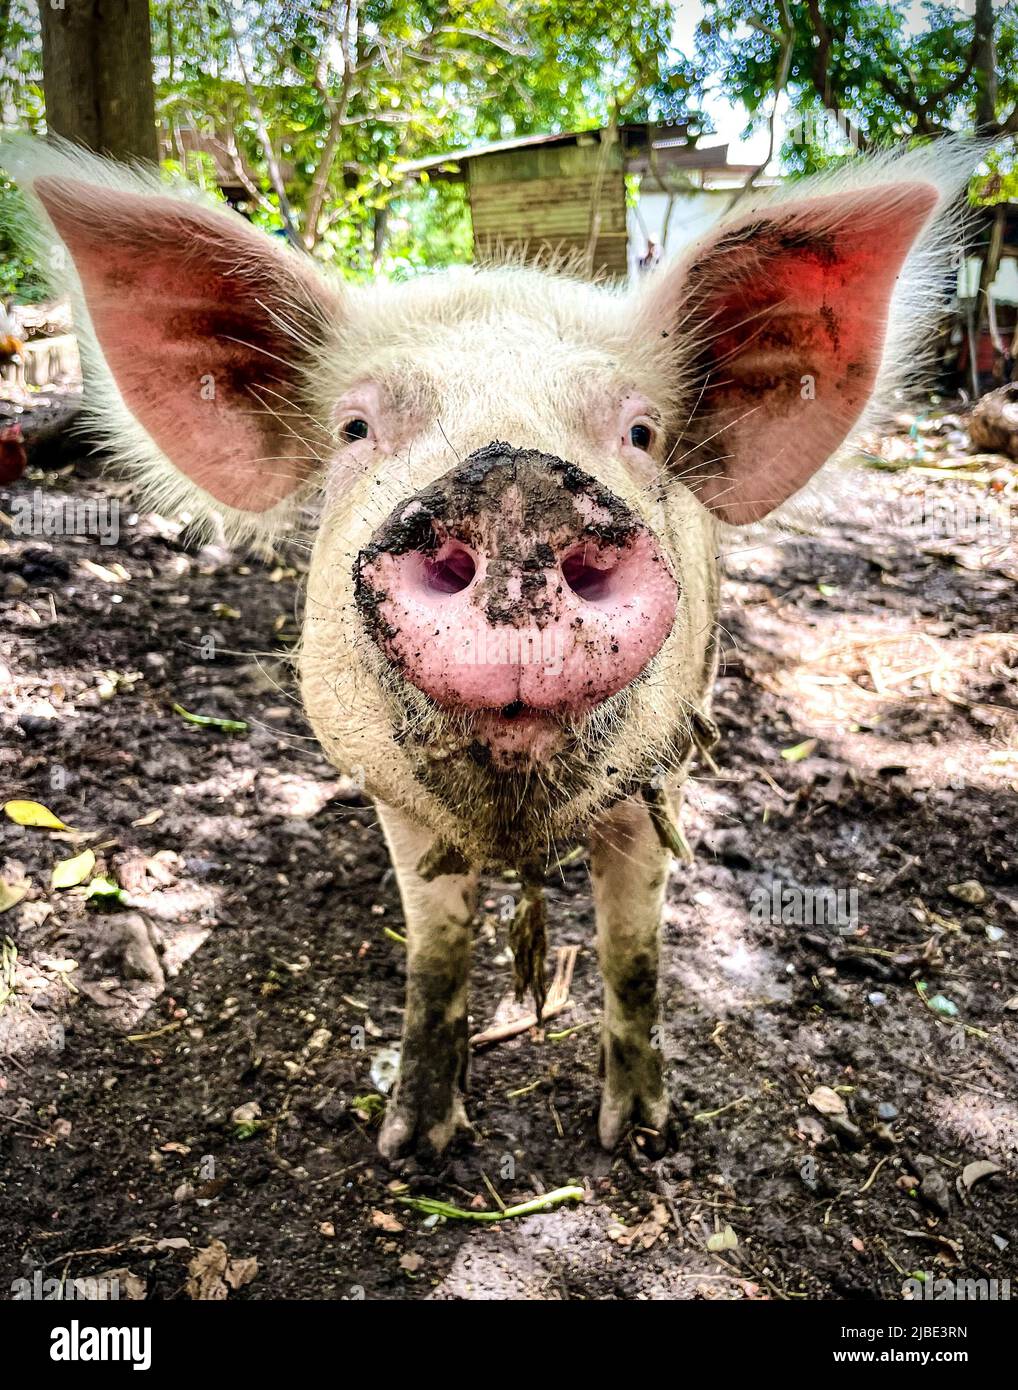 a funny photo of a pig with large ears covered in mud Stock Photo - Alamy